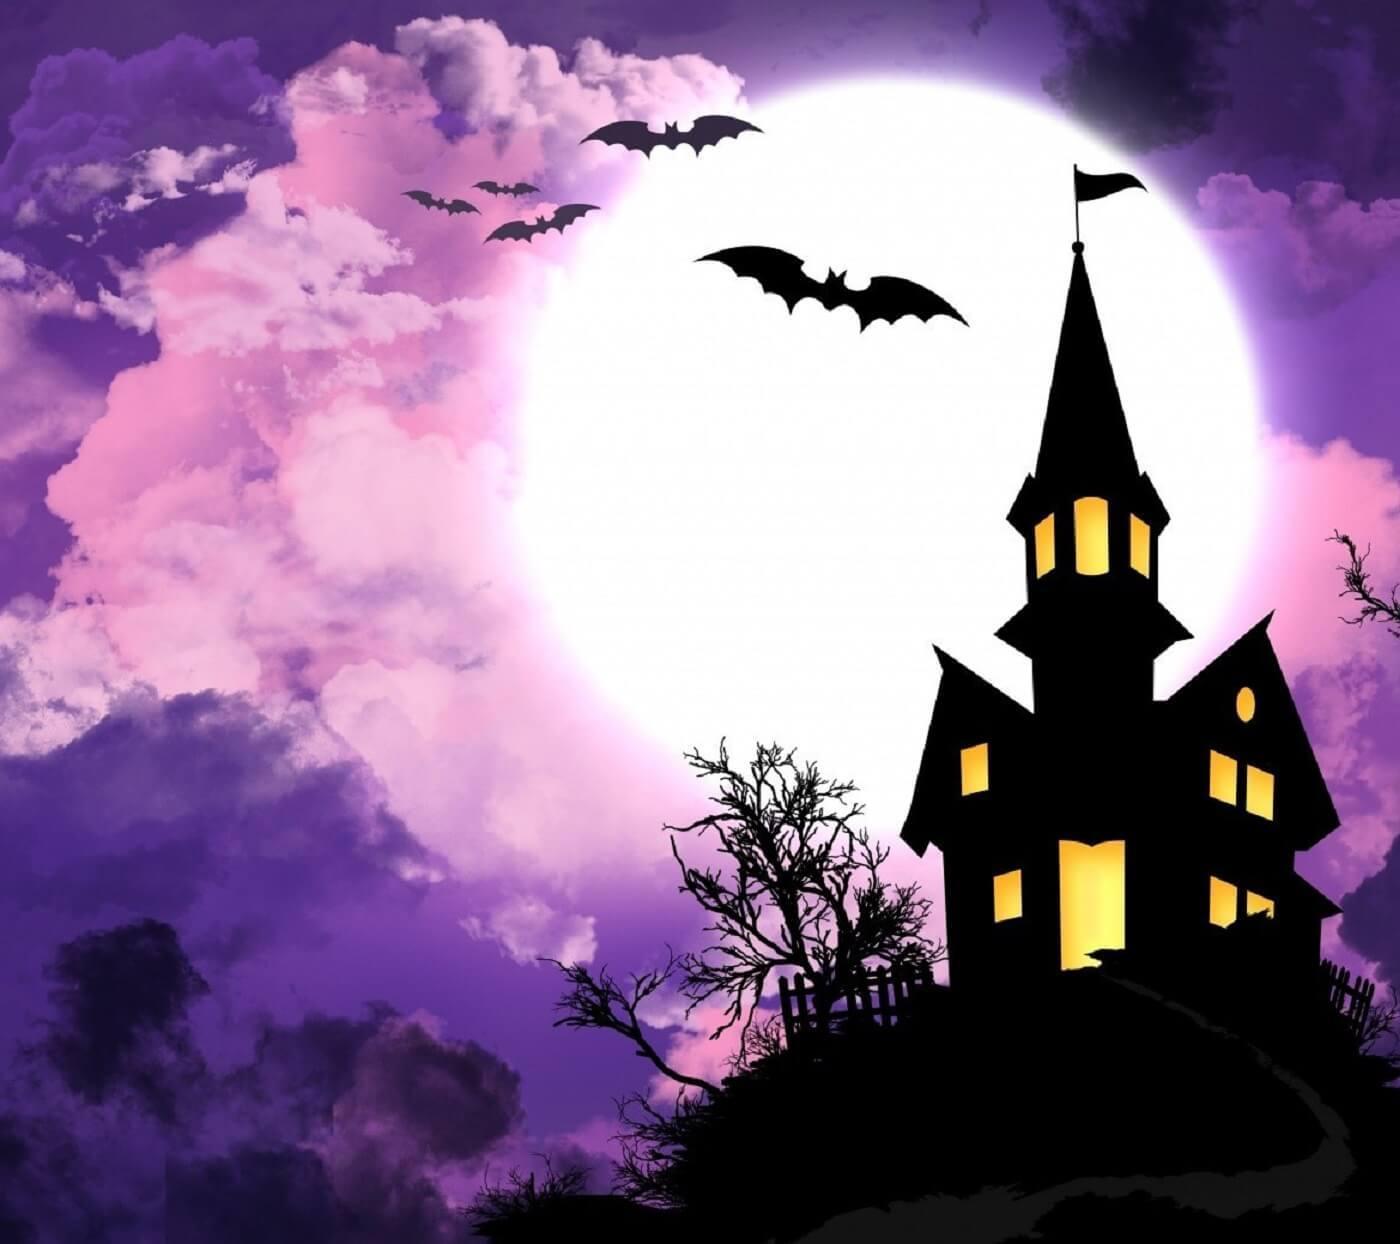 Pink And Purple Halloween Wallpapers - Wallpaper Cave